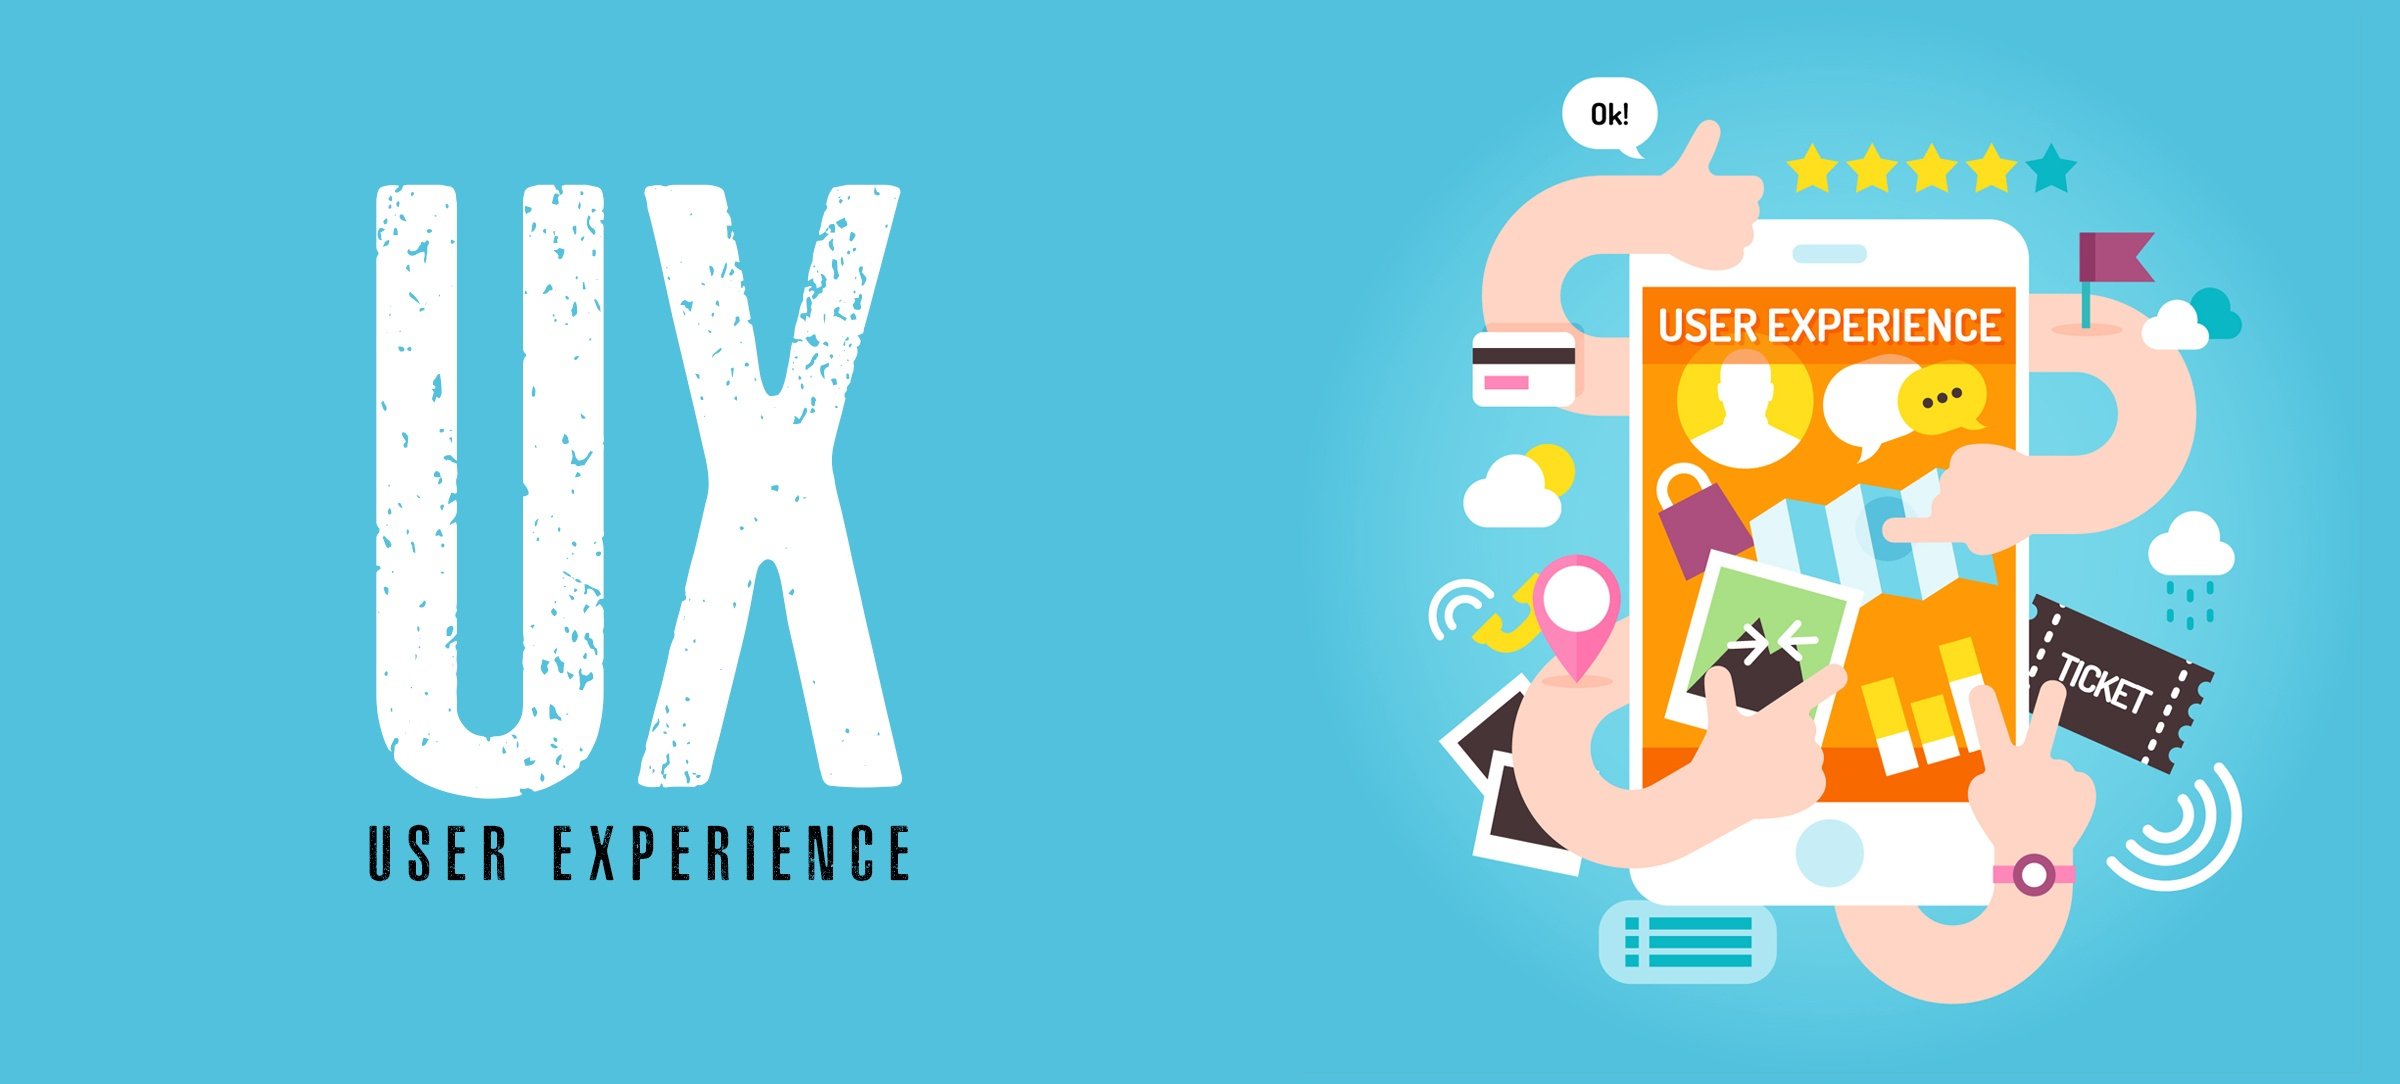 5 factors that impact user experience